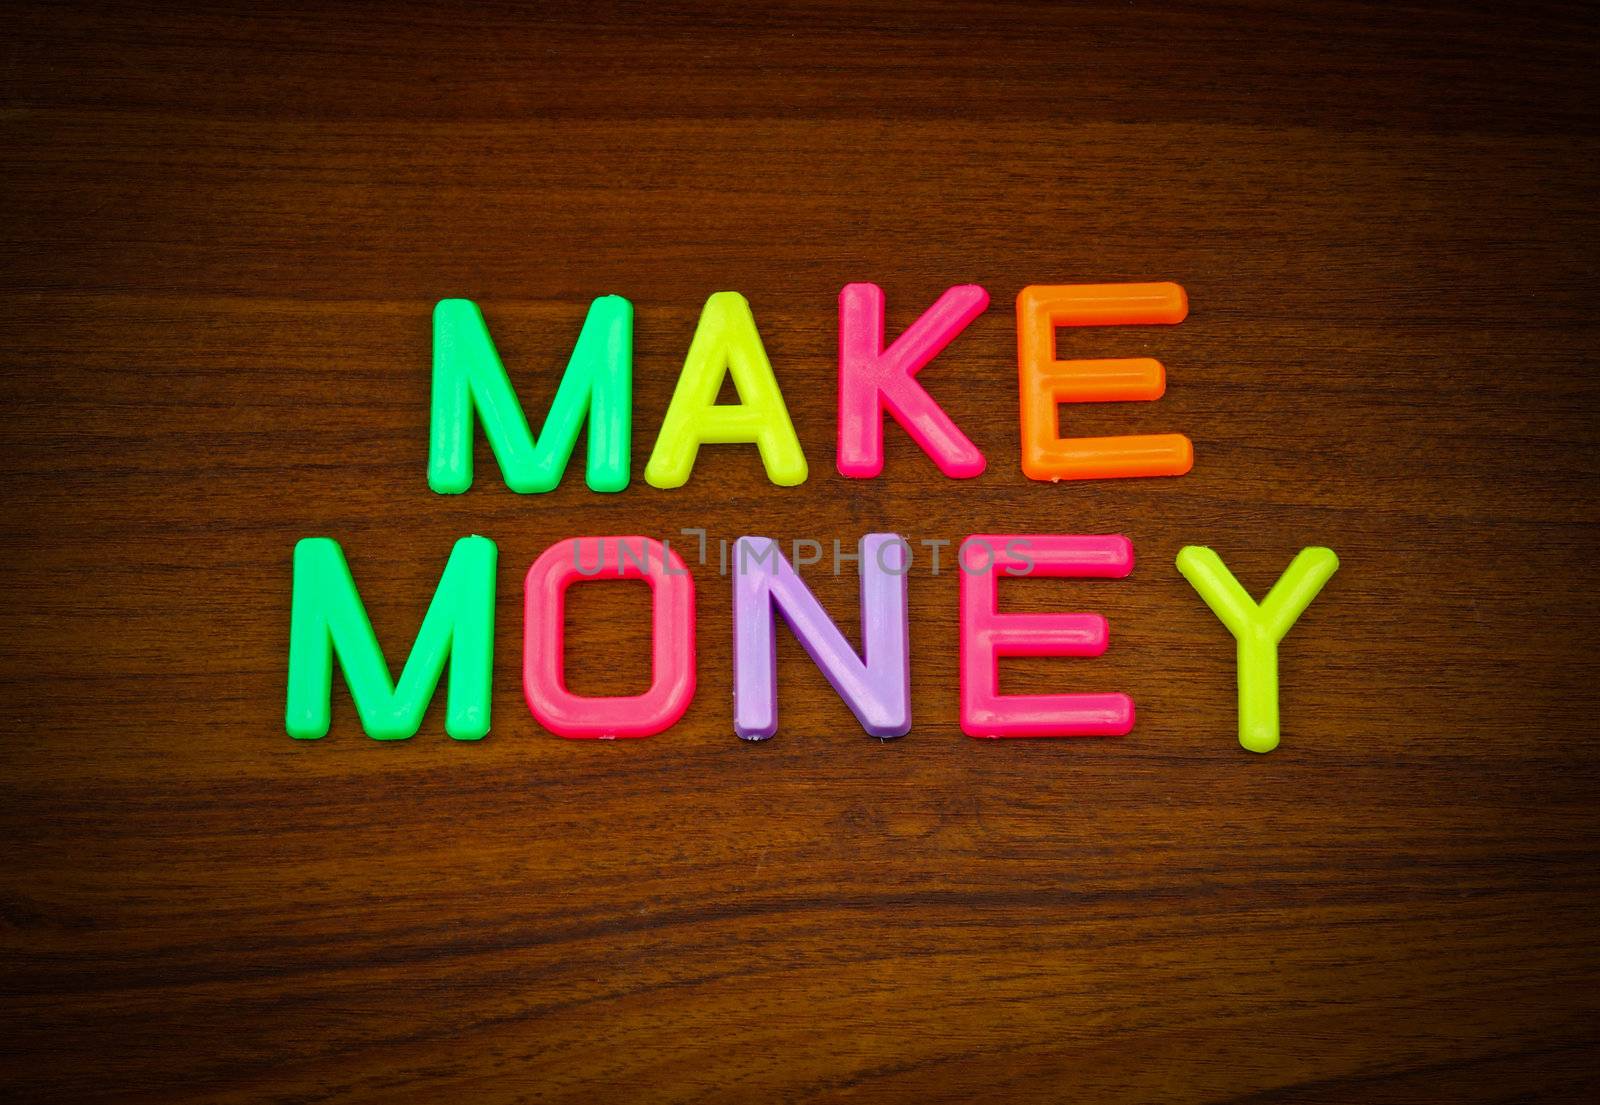 Make money in colorful toy letters on wood background  by nuchylee